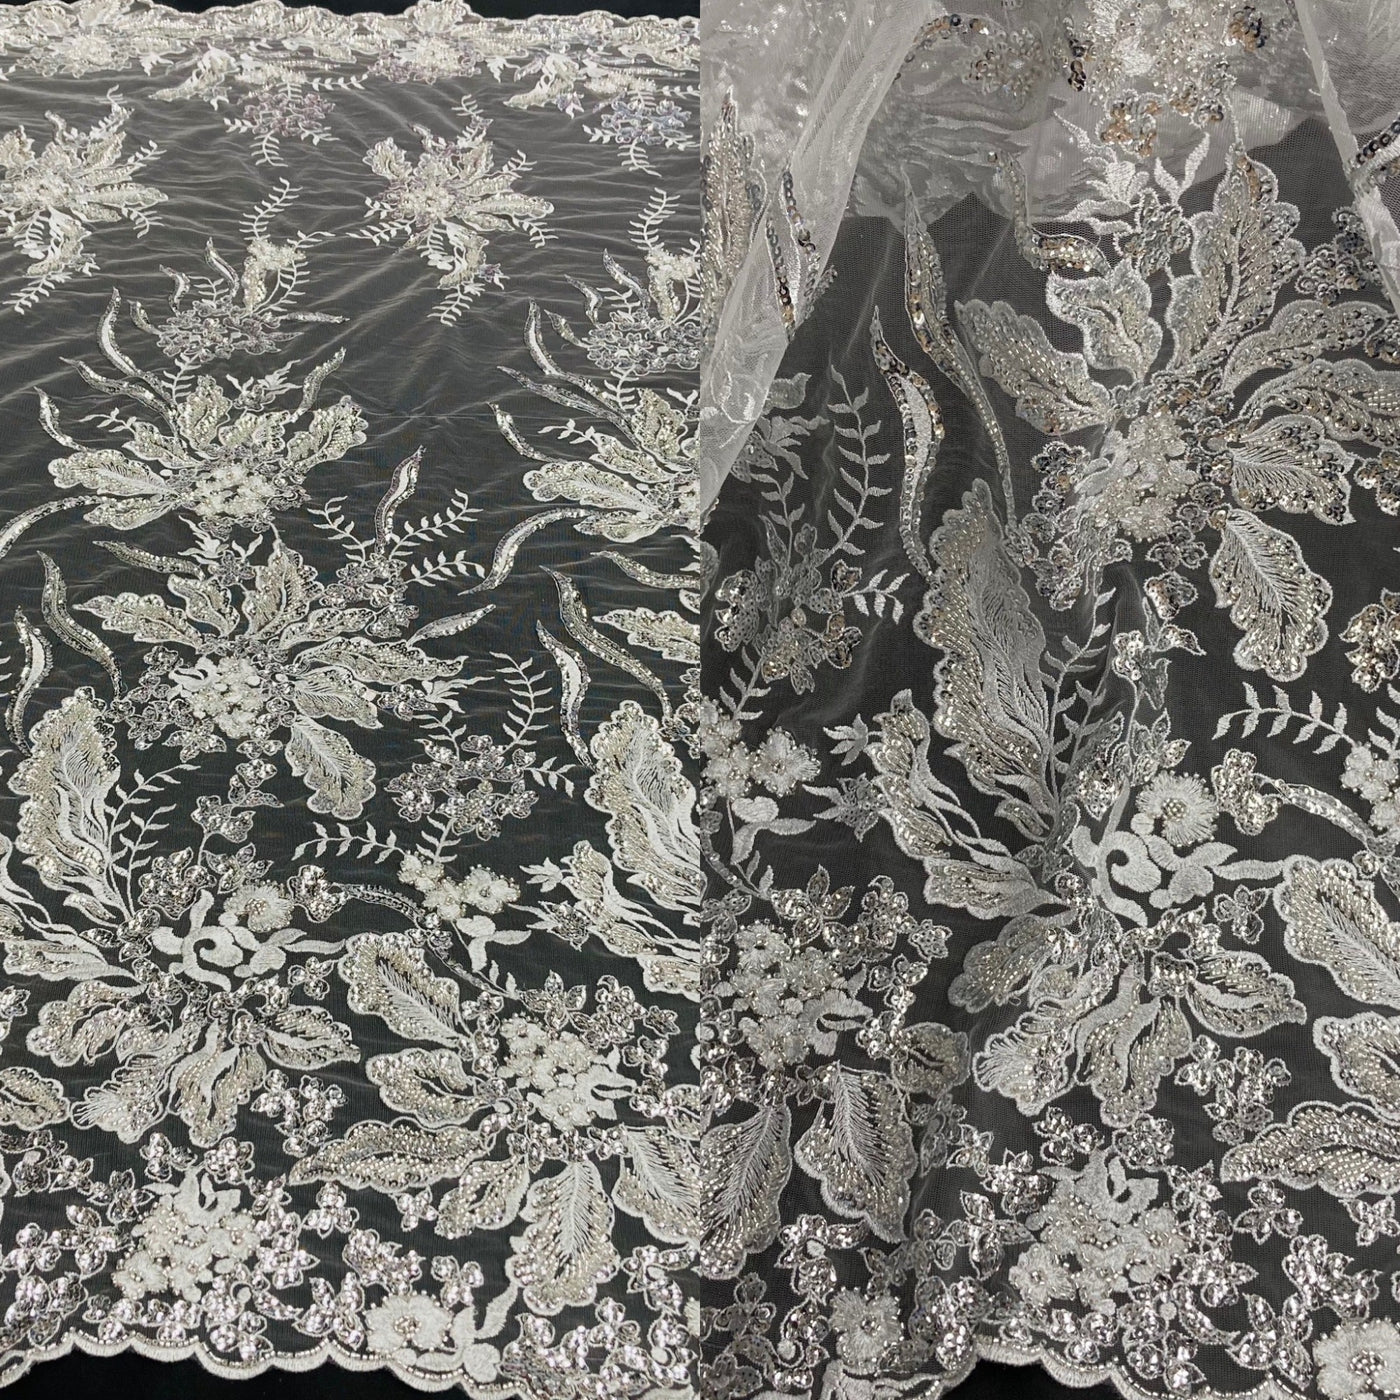 Beaded Lace Fabric Embroidered on 100% Polyester Net Mesh | Lace USA - GD-68321